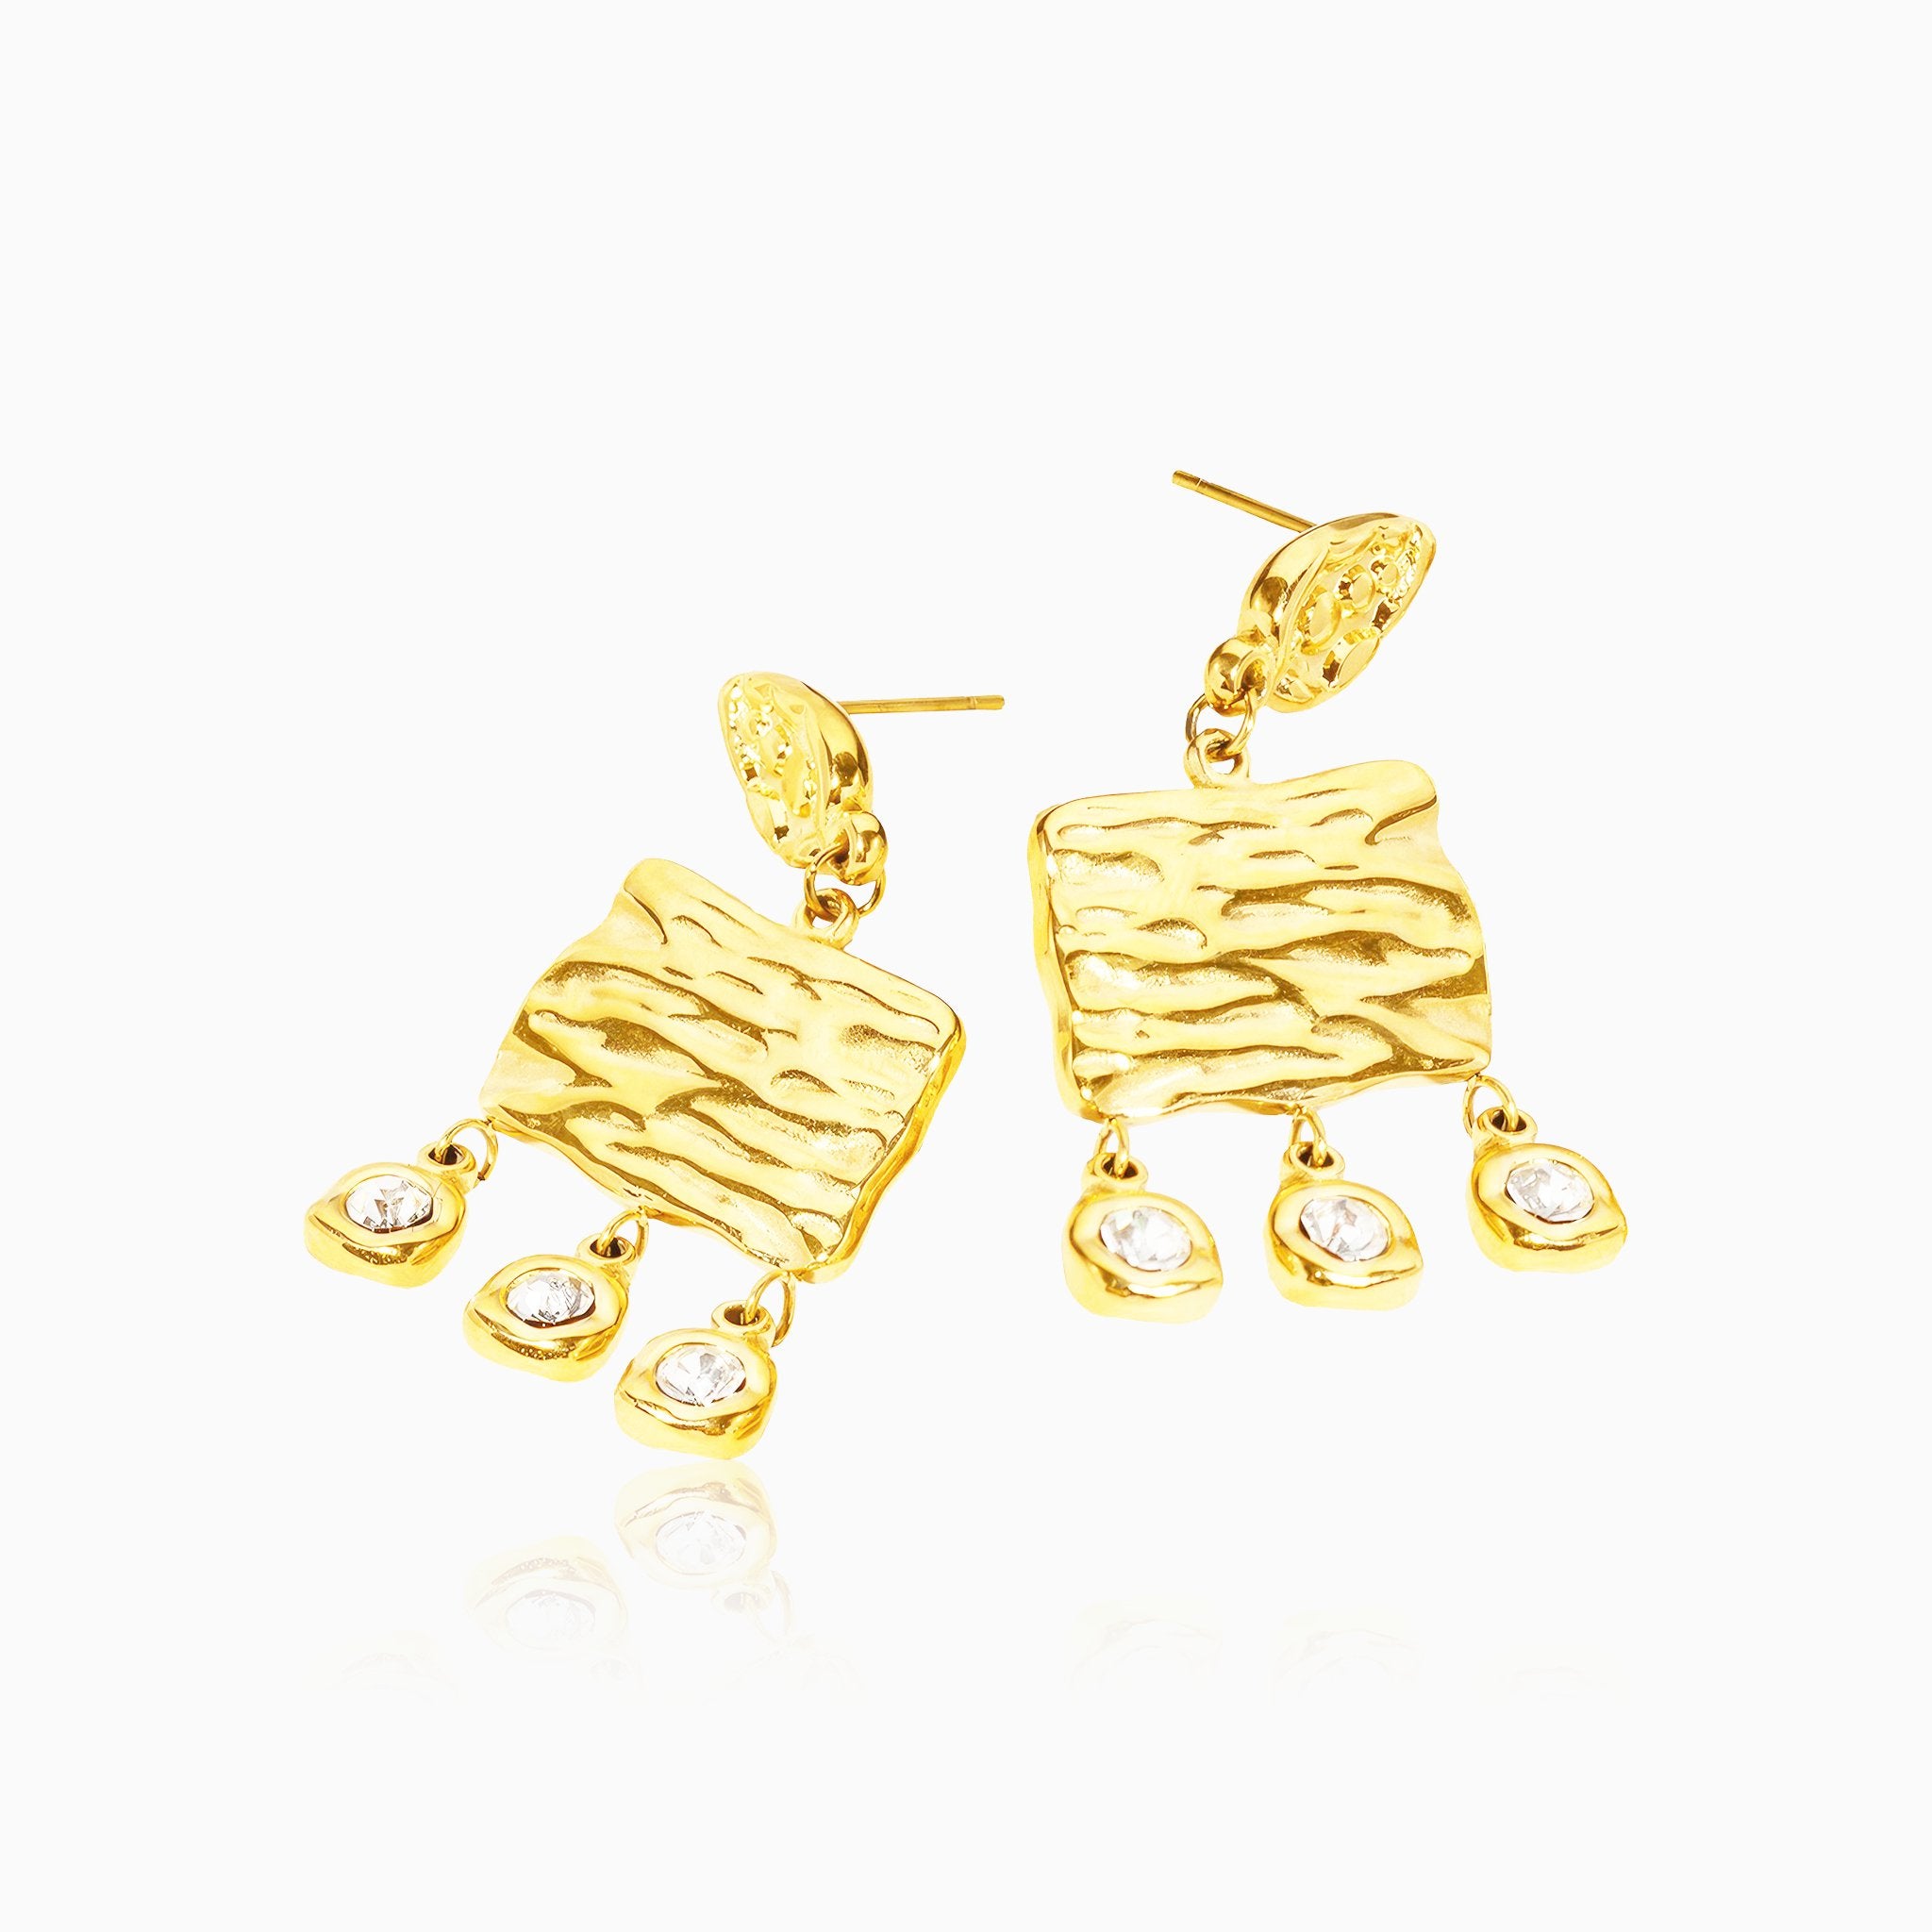 Square Plate Earrings with Gemstone Tassels - Nobbier - Earrings - 18K Gold And Titanium PVD Coated Jewelry